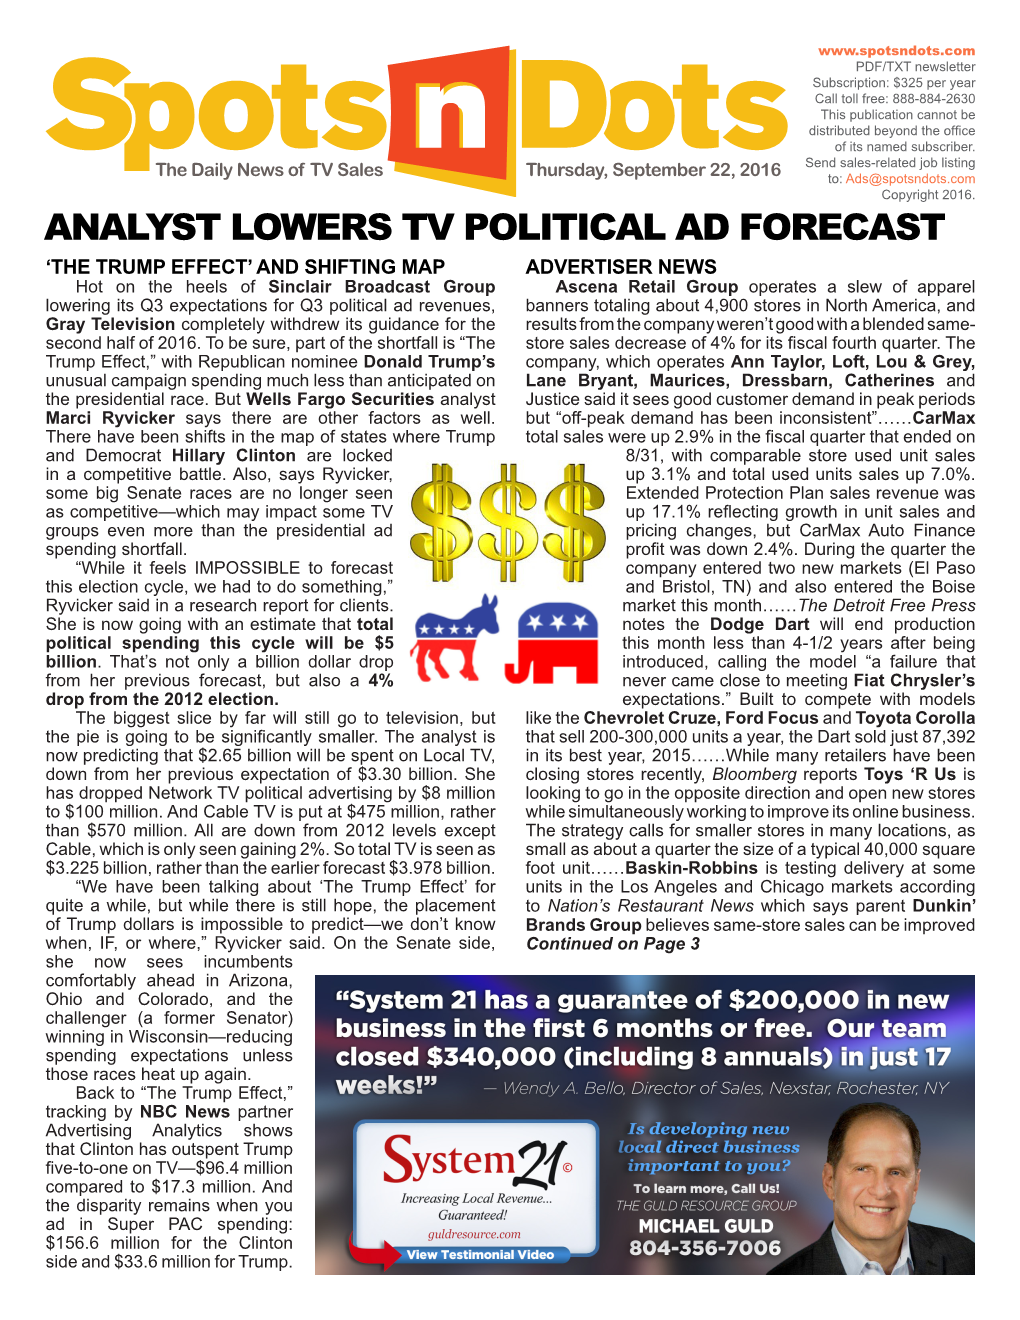 Analyst Lowers Tv Political Ad Forecast